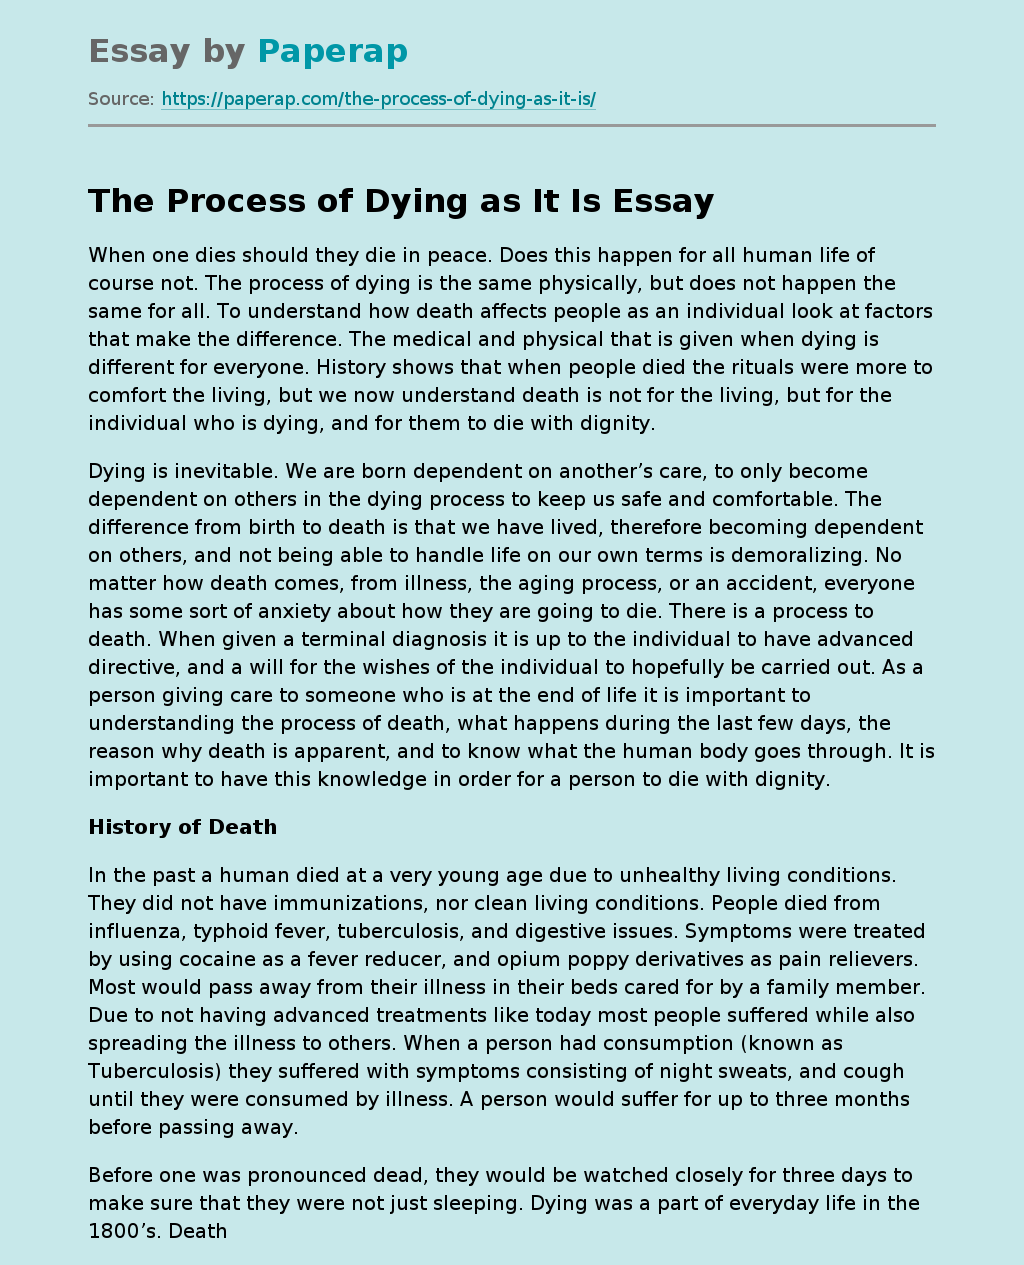 The Process of Dying as It Is